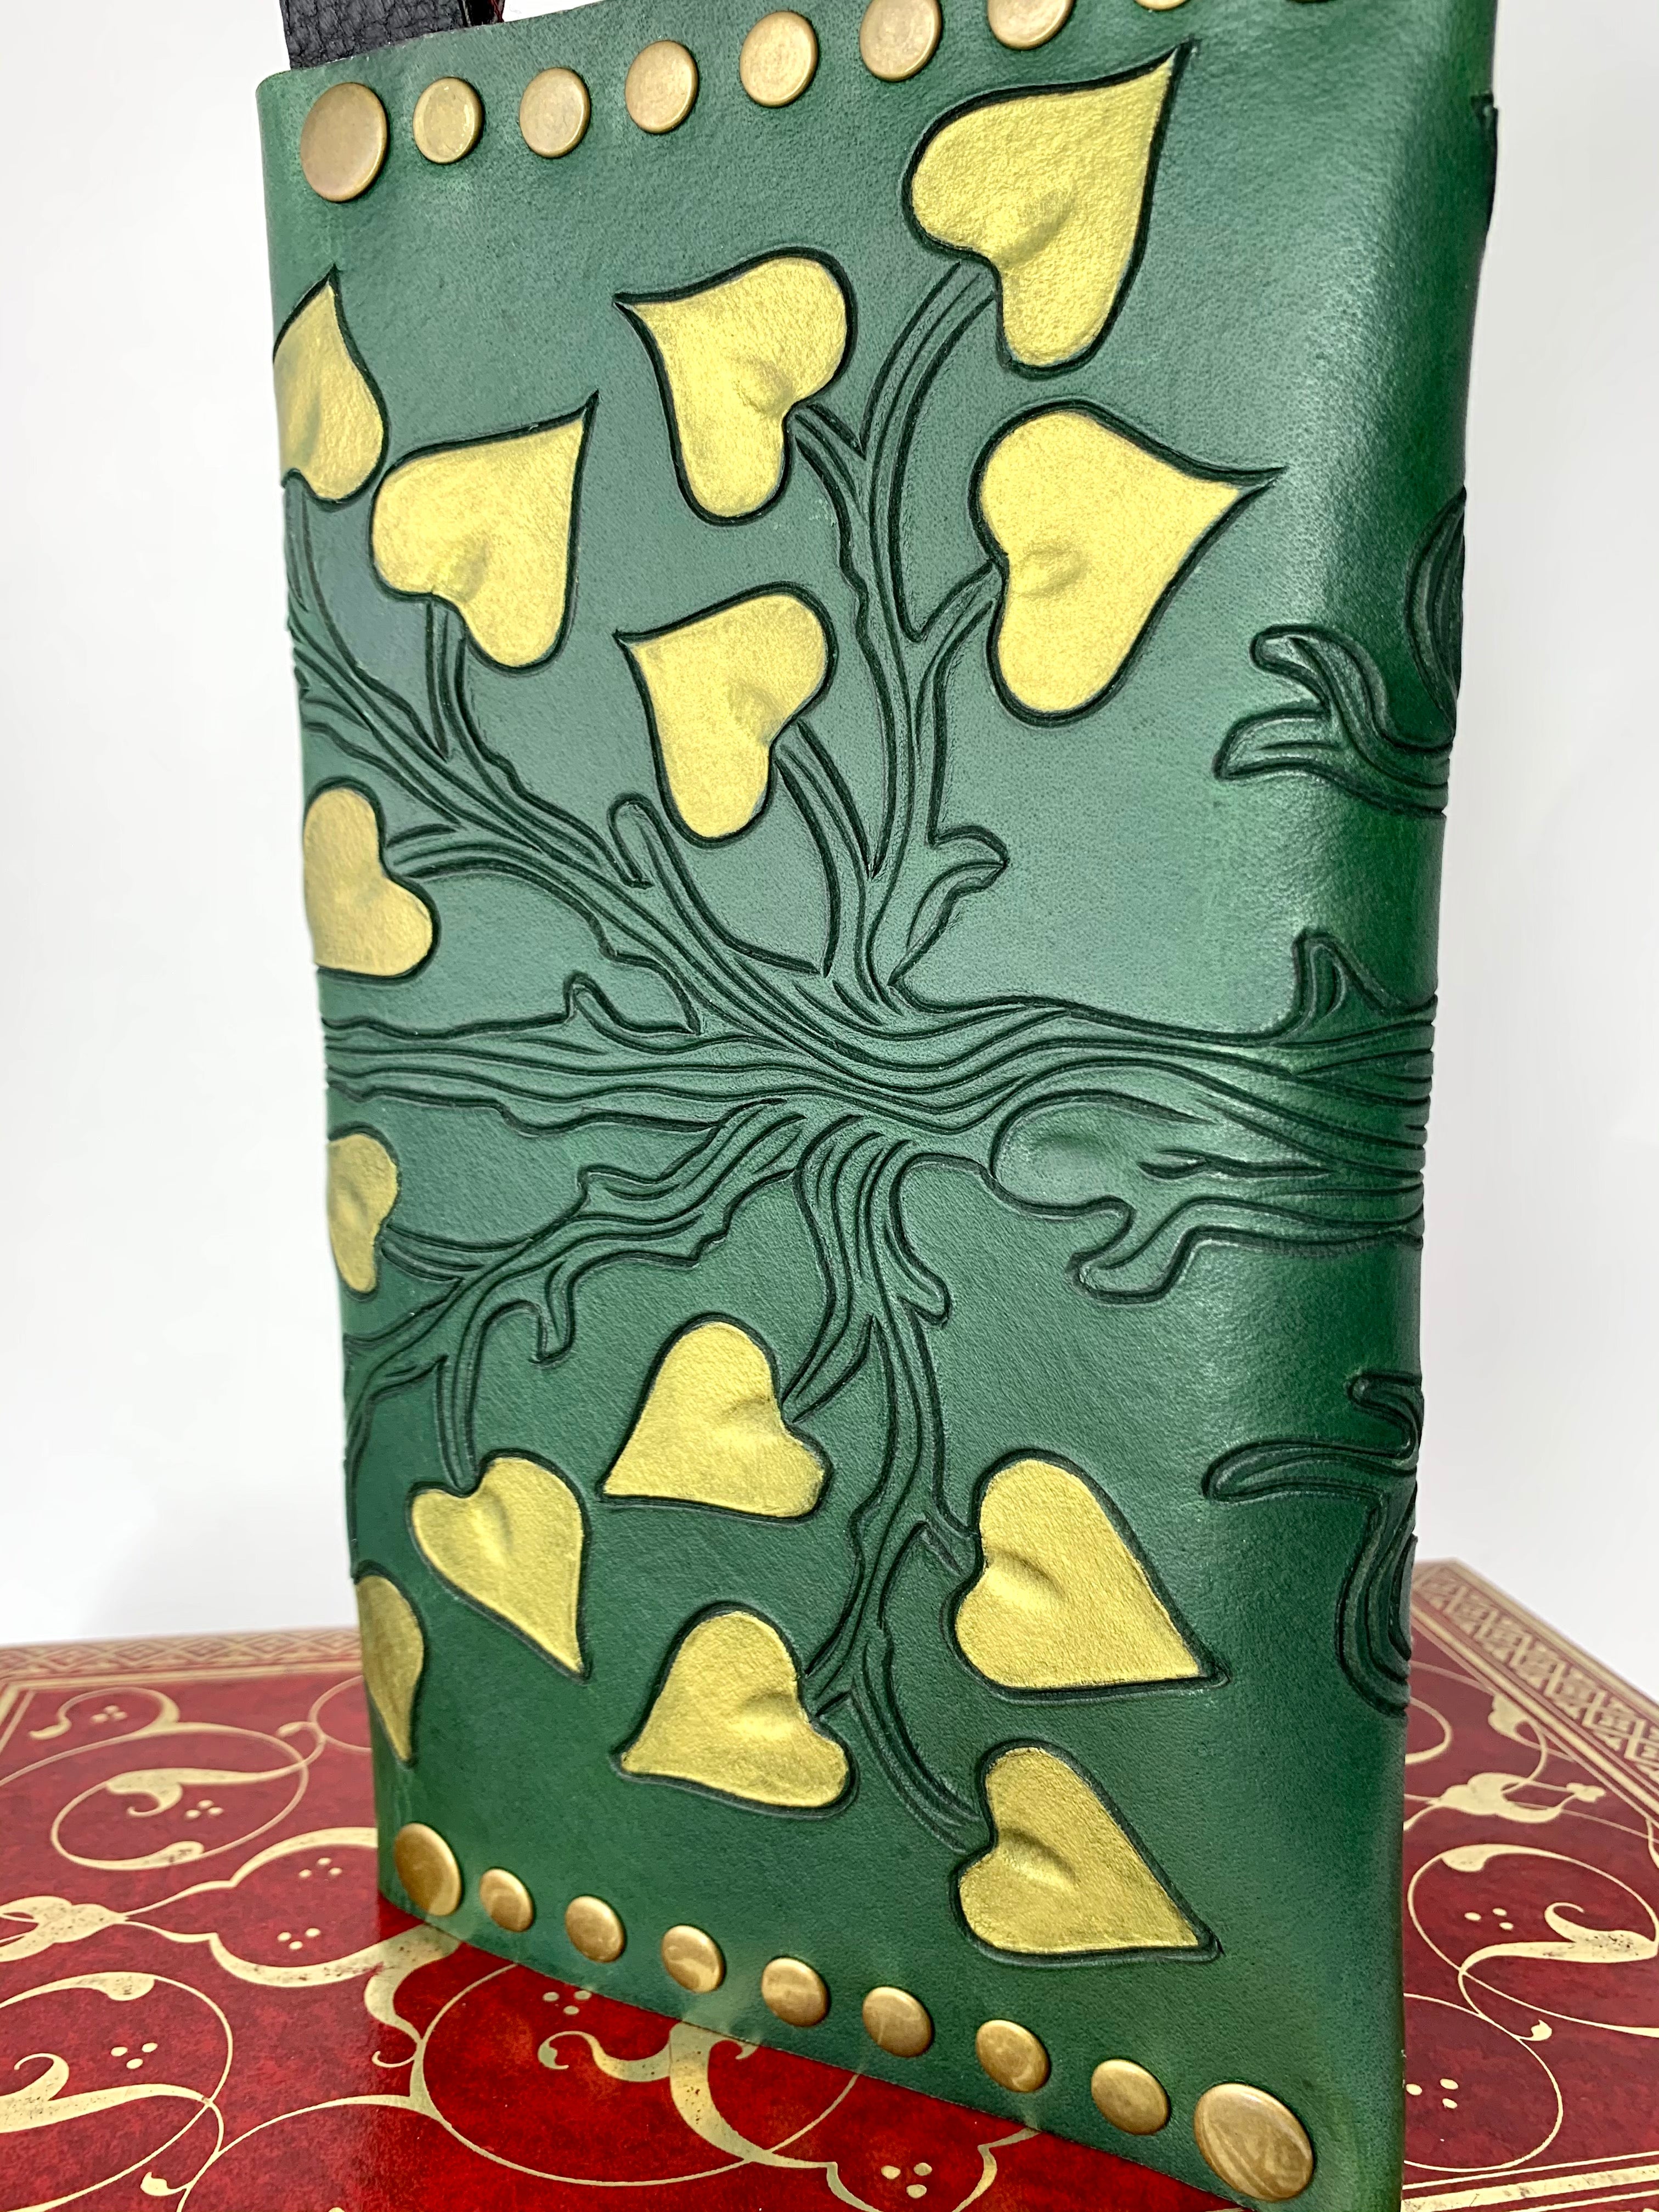 Tree of Life - Hand Carved and Painted Vegetable Tanned Leather Clutch -  Six Wings by Skrocki Design